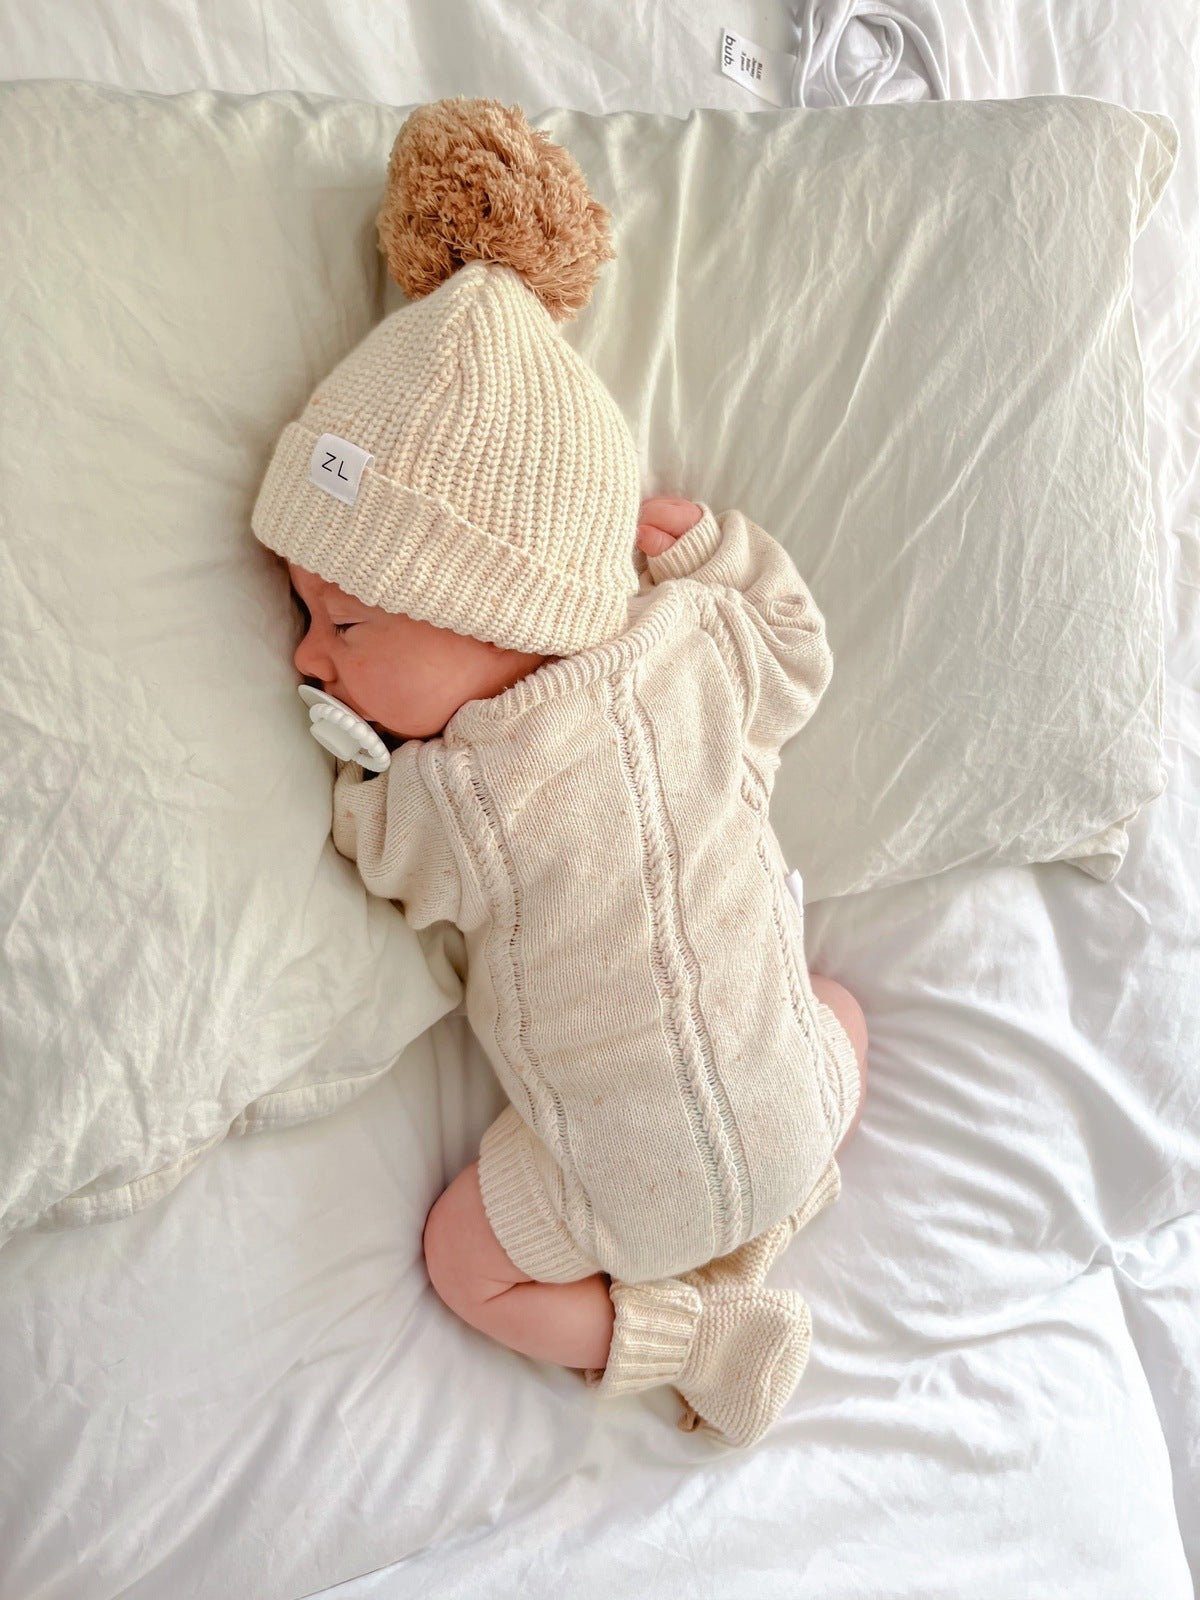 Winter Newborn Outfit | Heirloom Romper For Baby | Brave Little Lamb